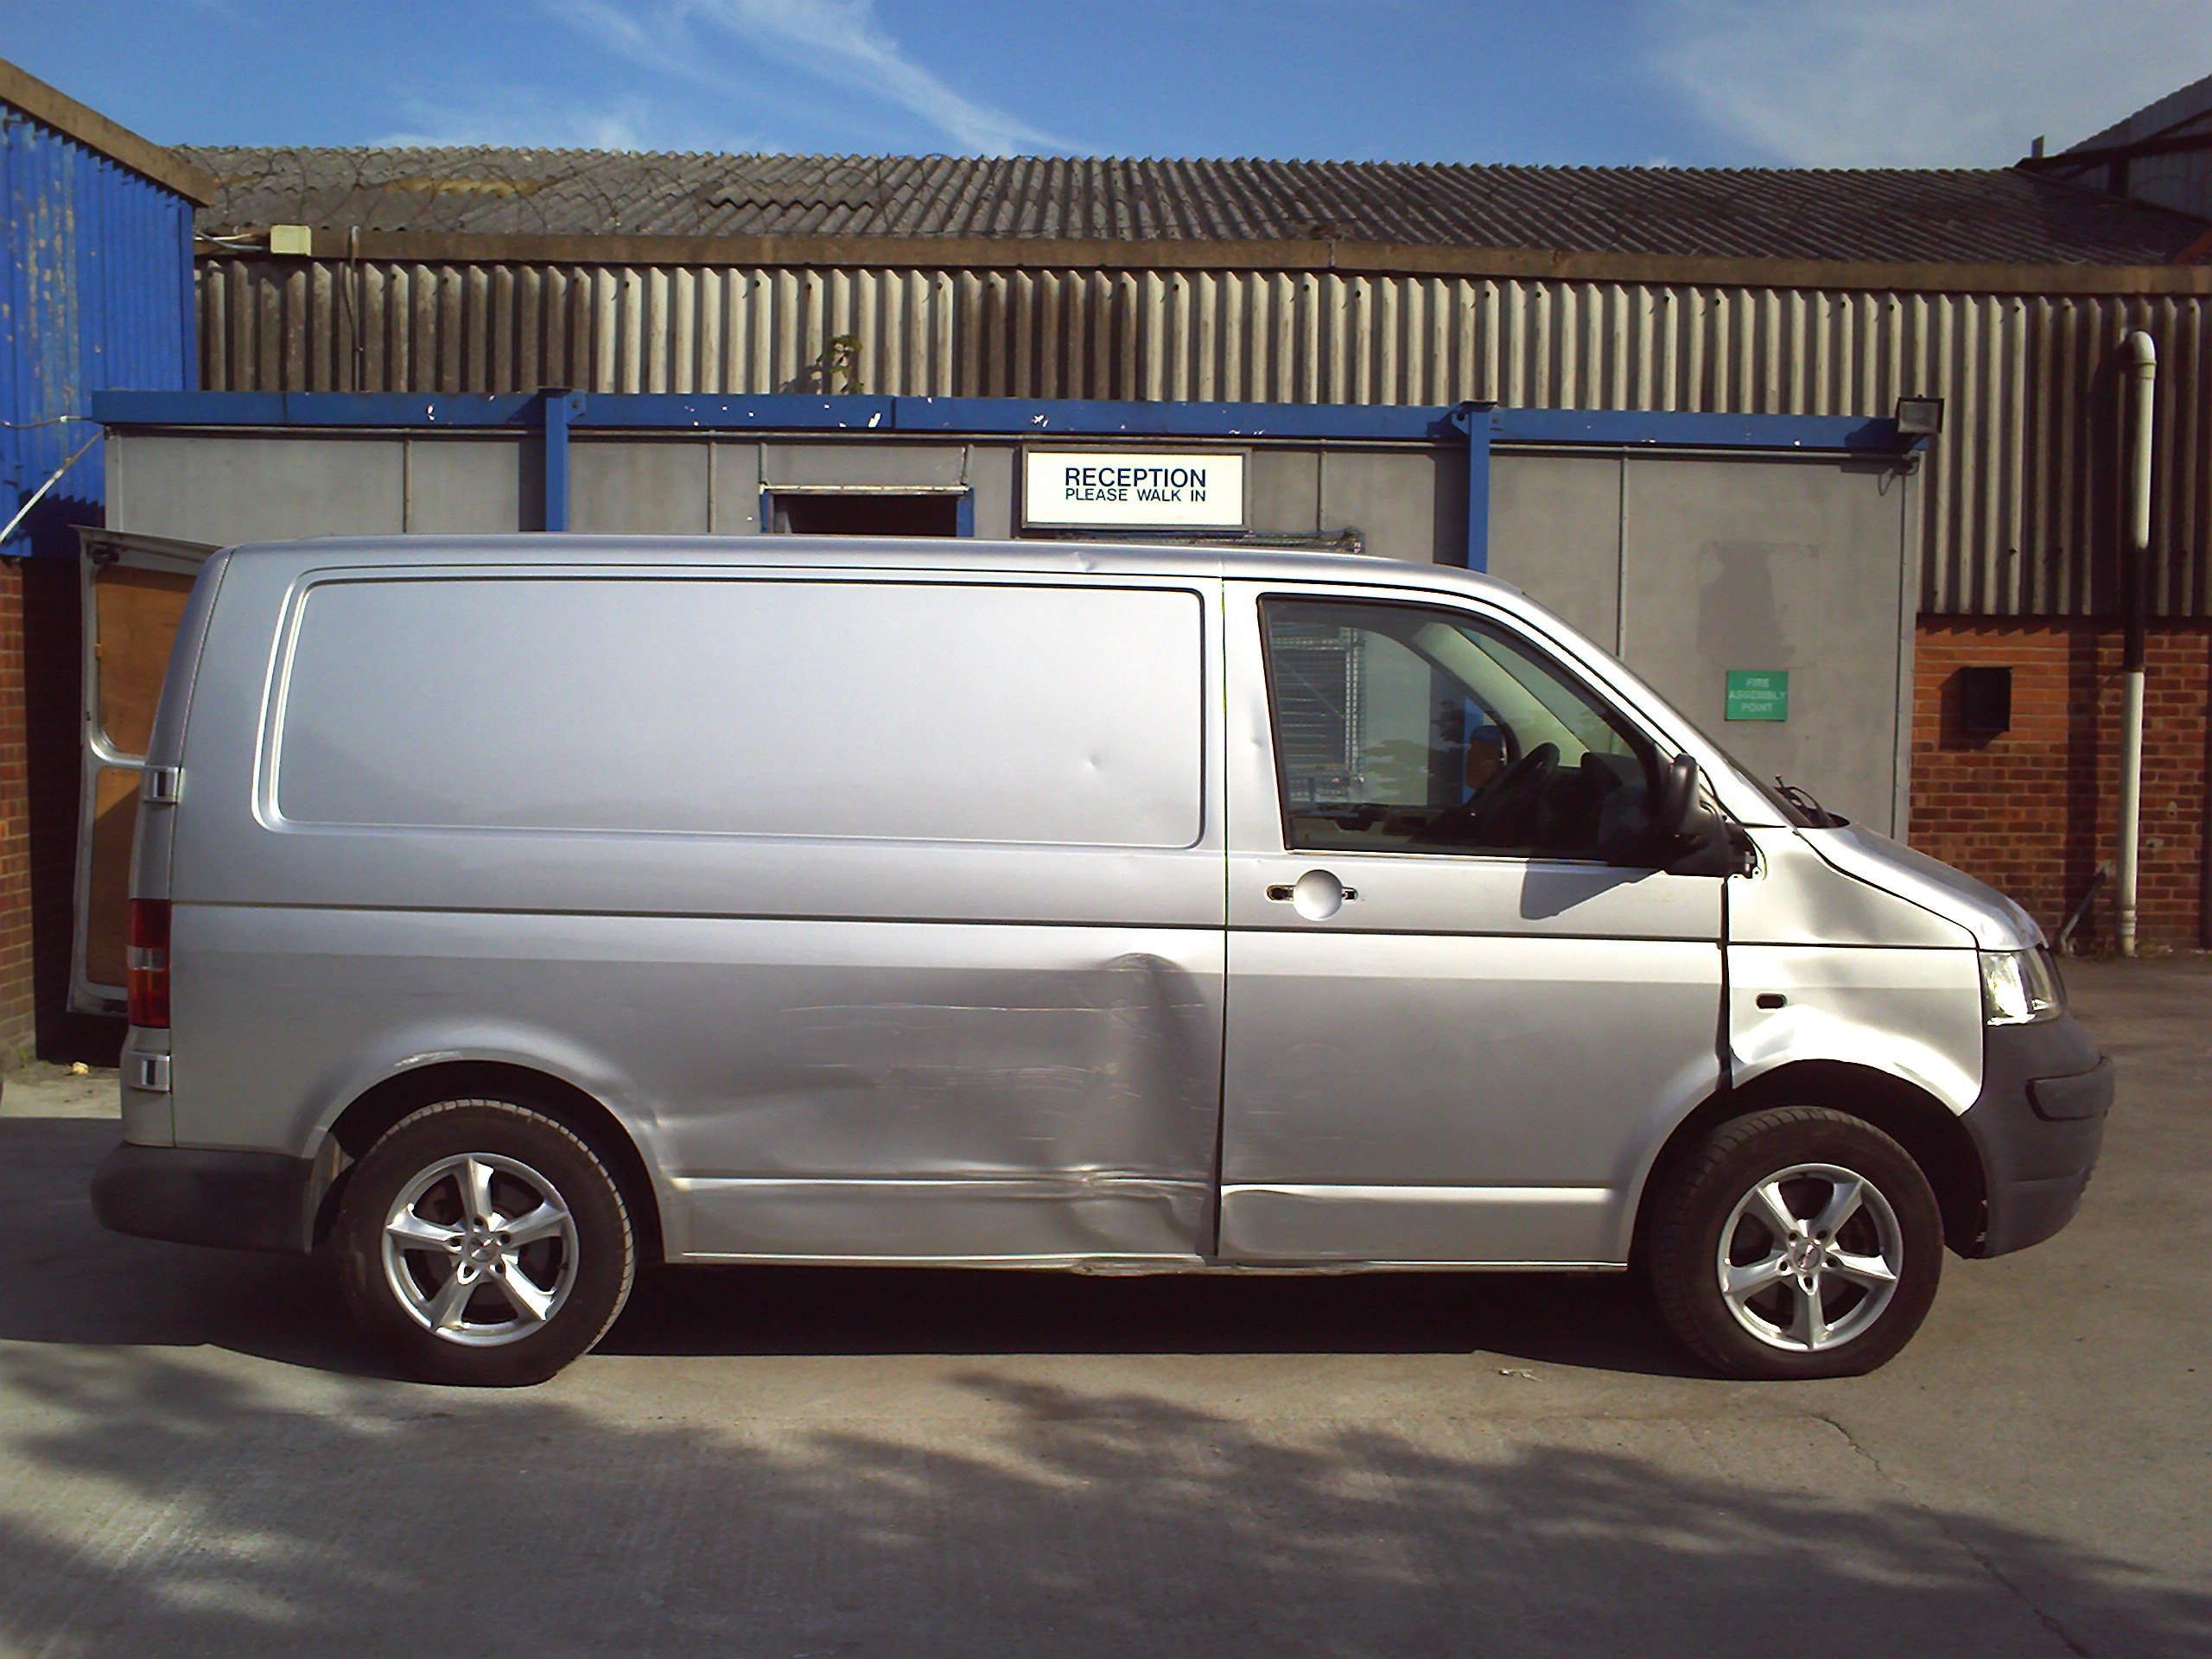 Volkswagen Transporter in reperation of on going insurance repair work at our facilities based in Hull